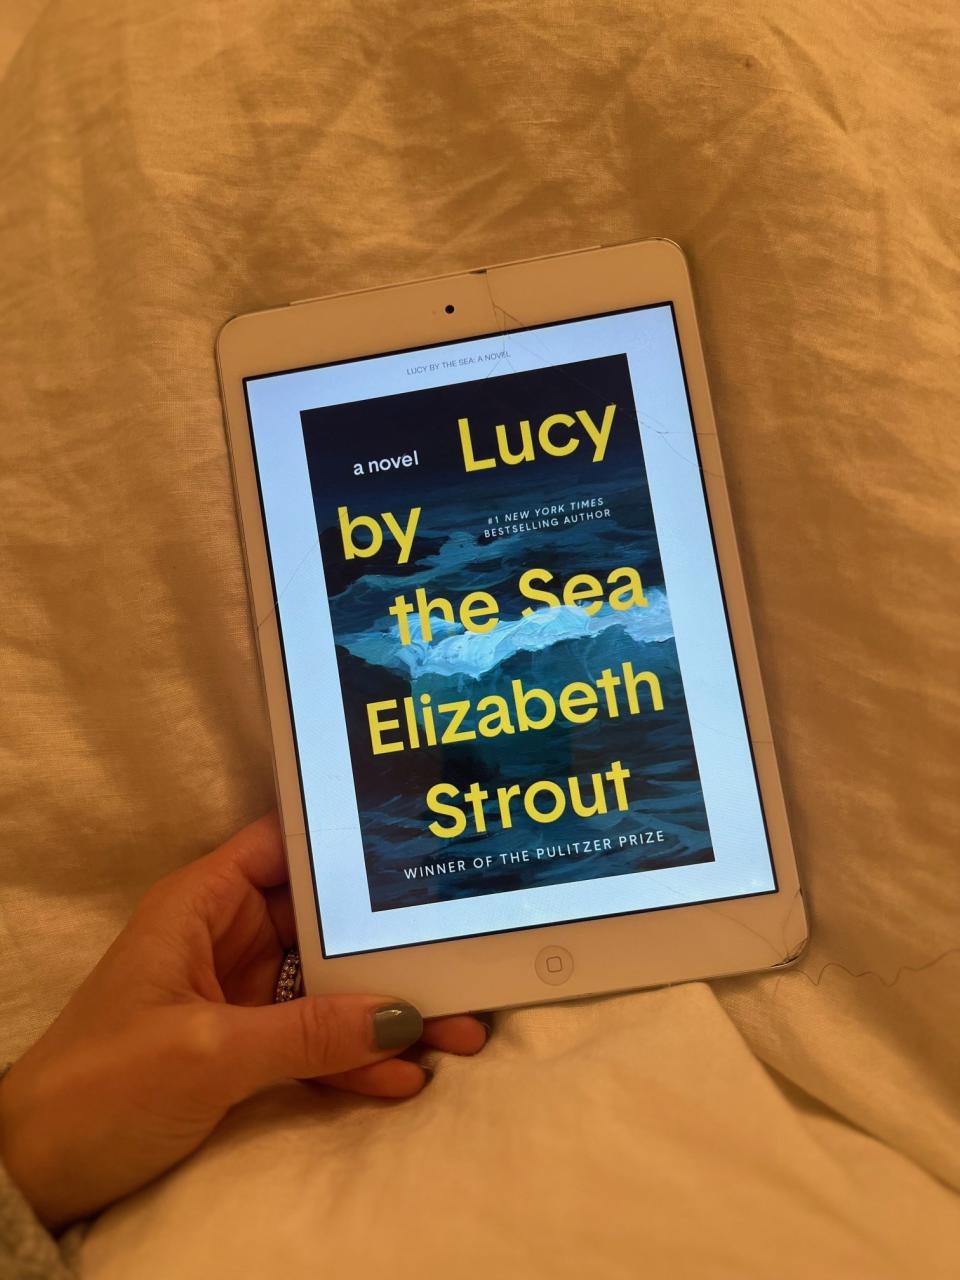 "Lucy By The Sea" by Elizabeth Strout